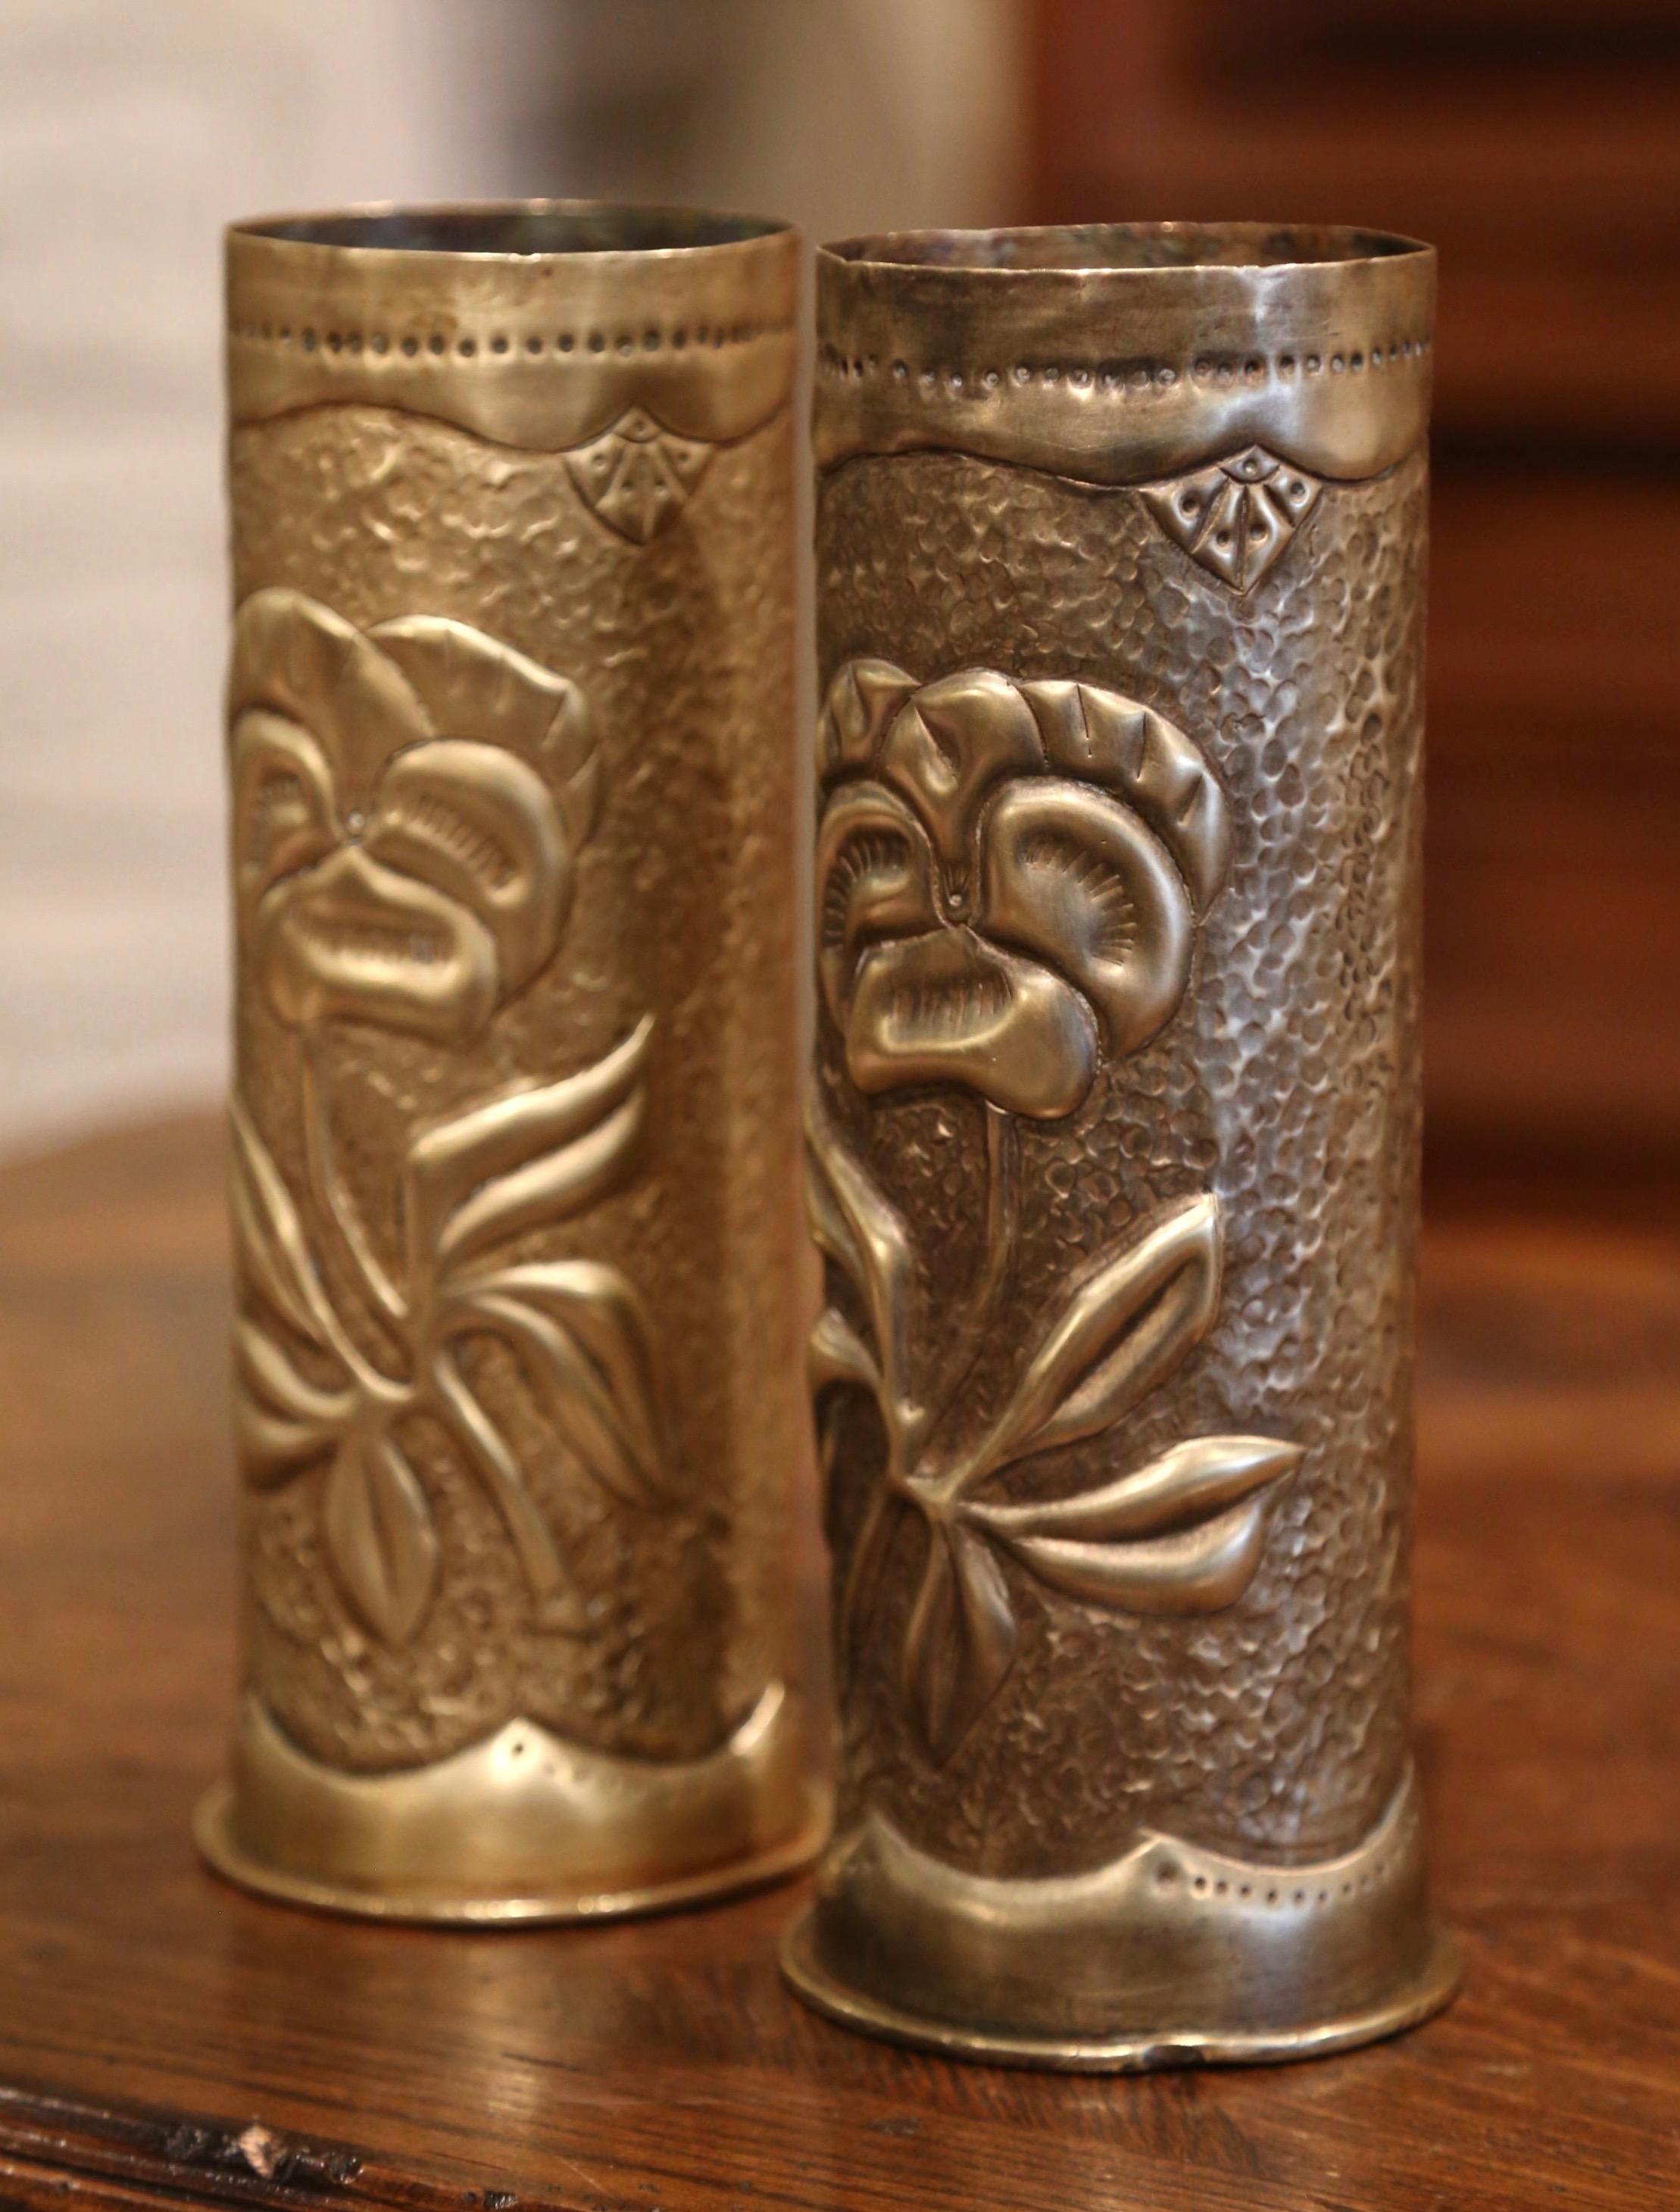 trench art shell casing